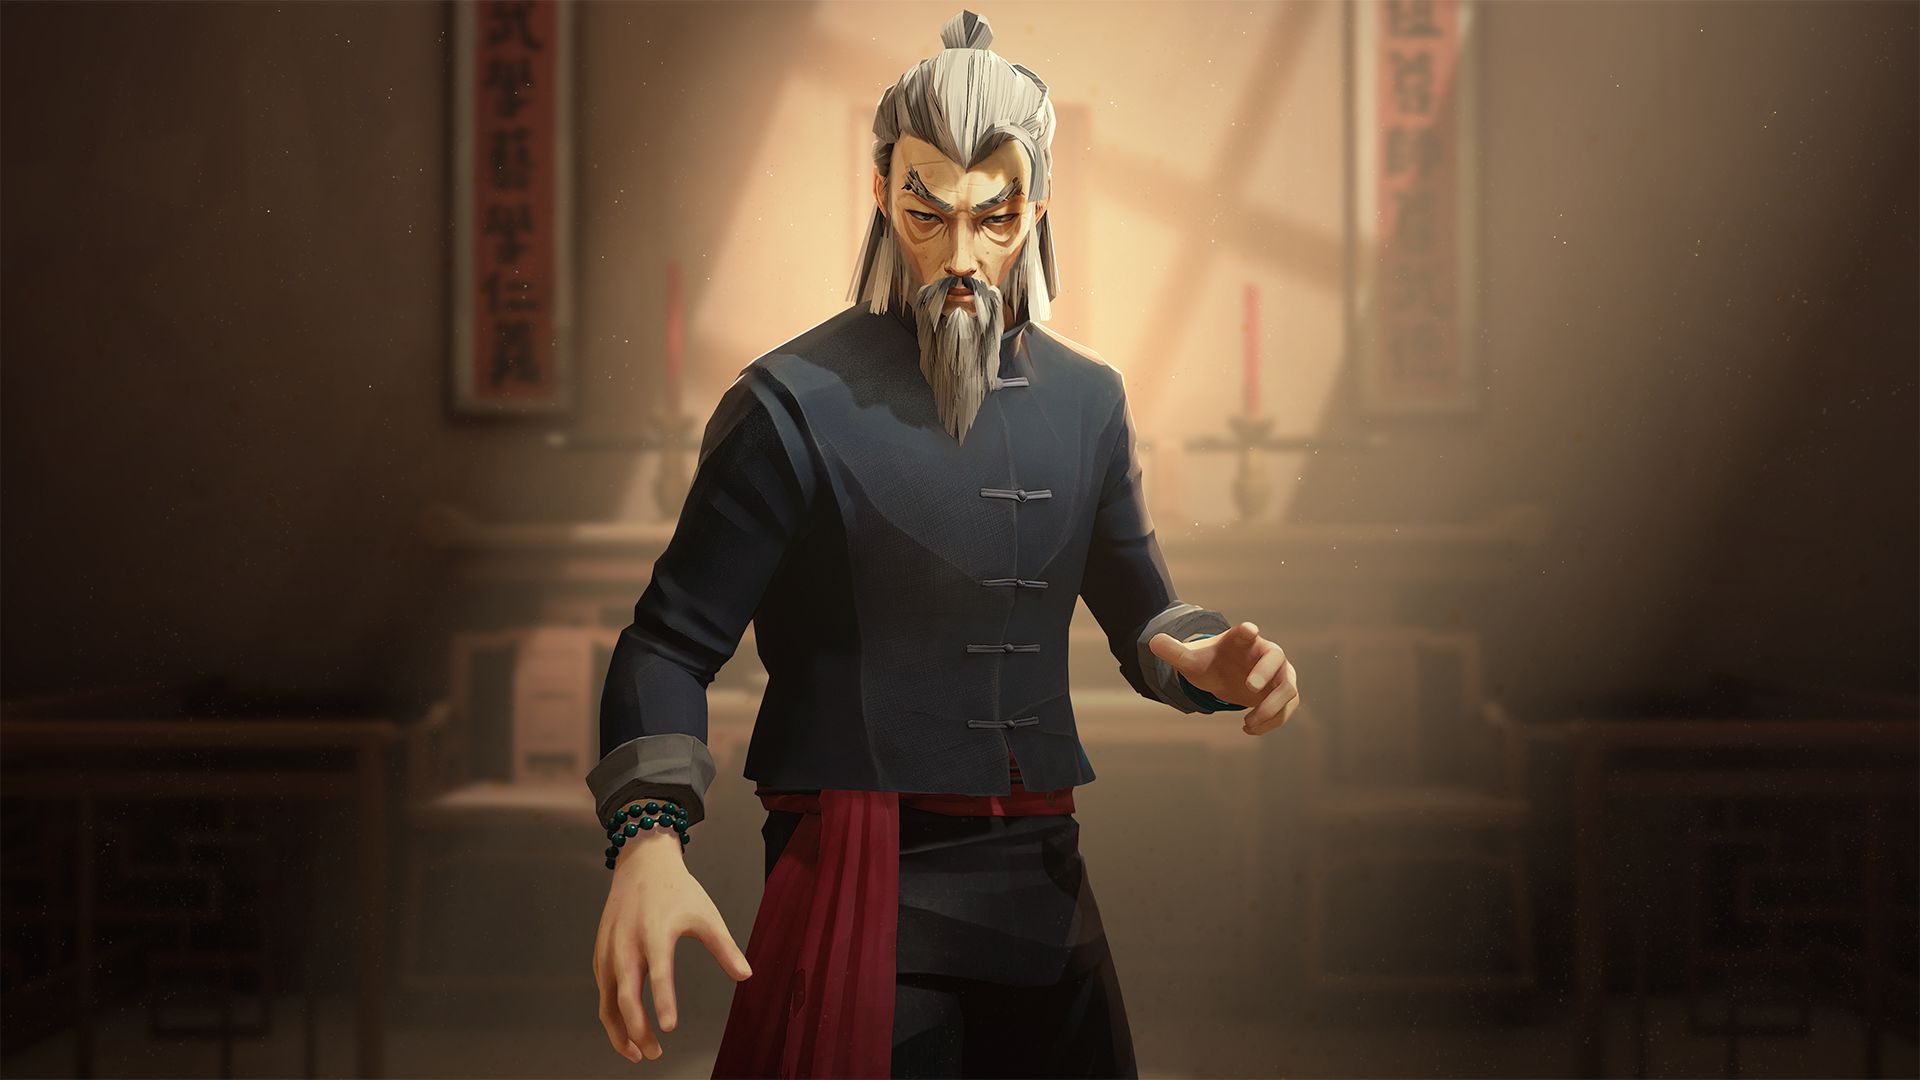 Sifu Update Adds Difficulty Options, Advanced Training Mode, and More